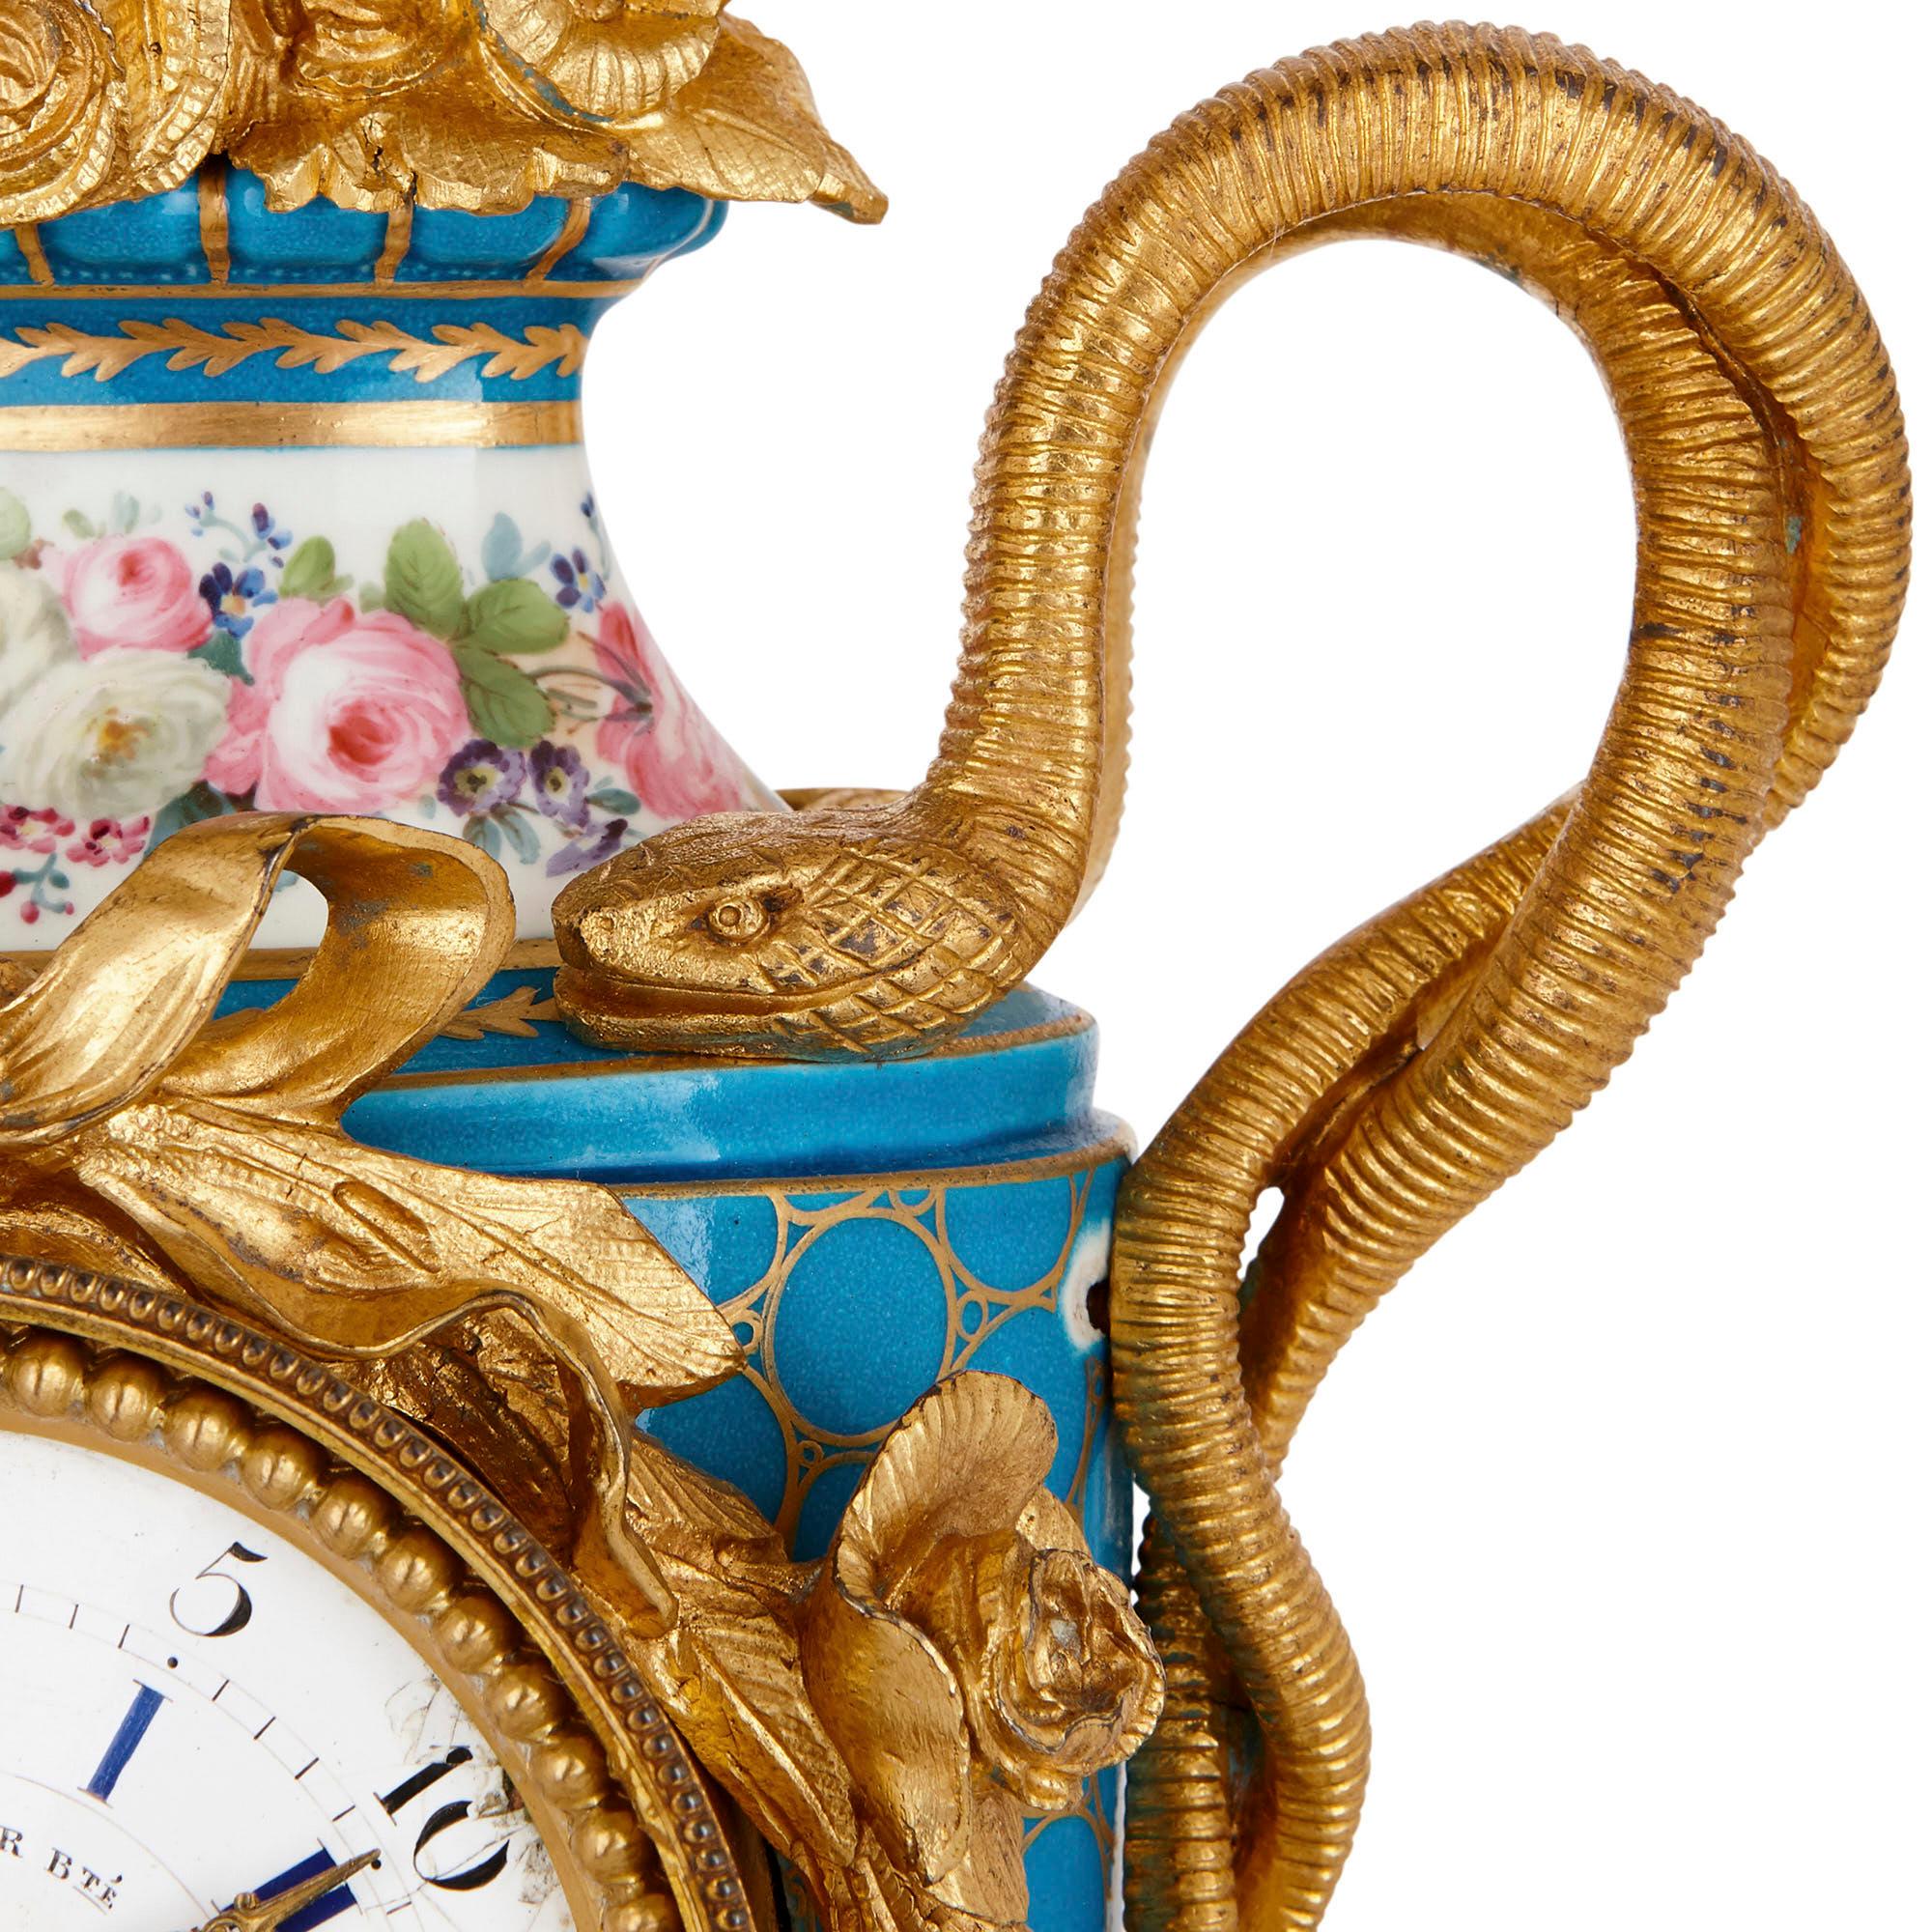 Sèvres Style Ormolu Mounted Mantel Clock by Kreisser In Good Condition For Sale In London, GB